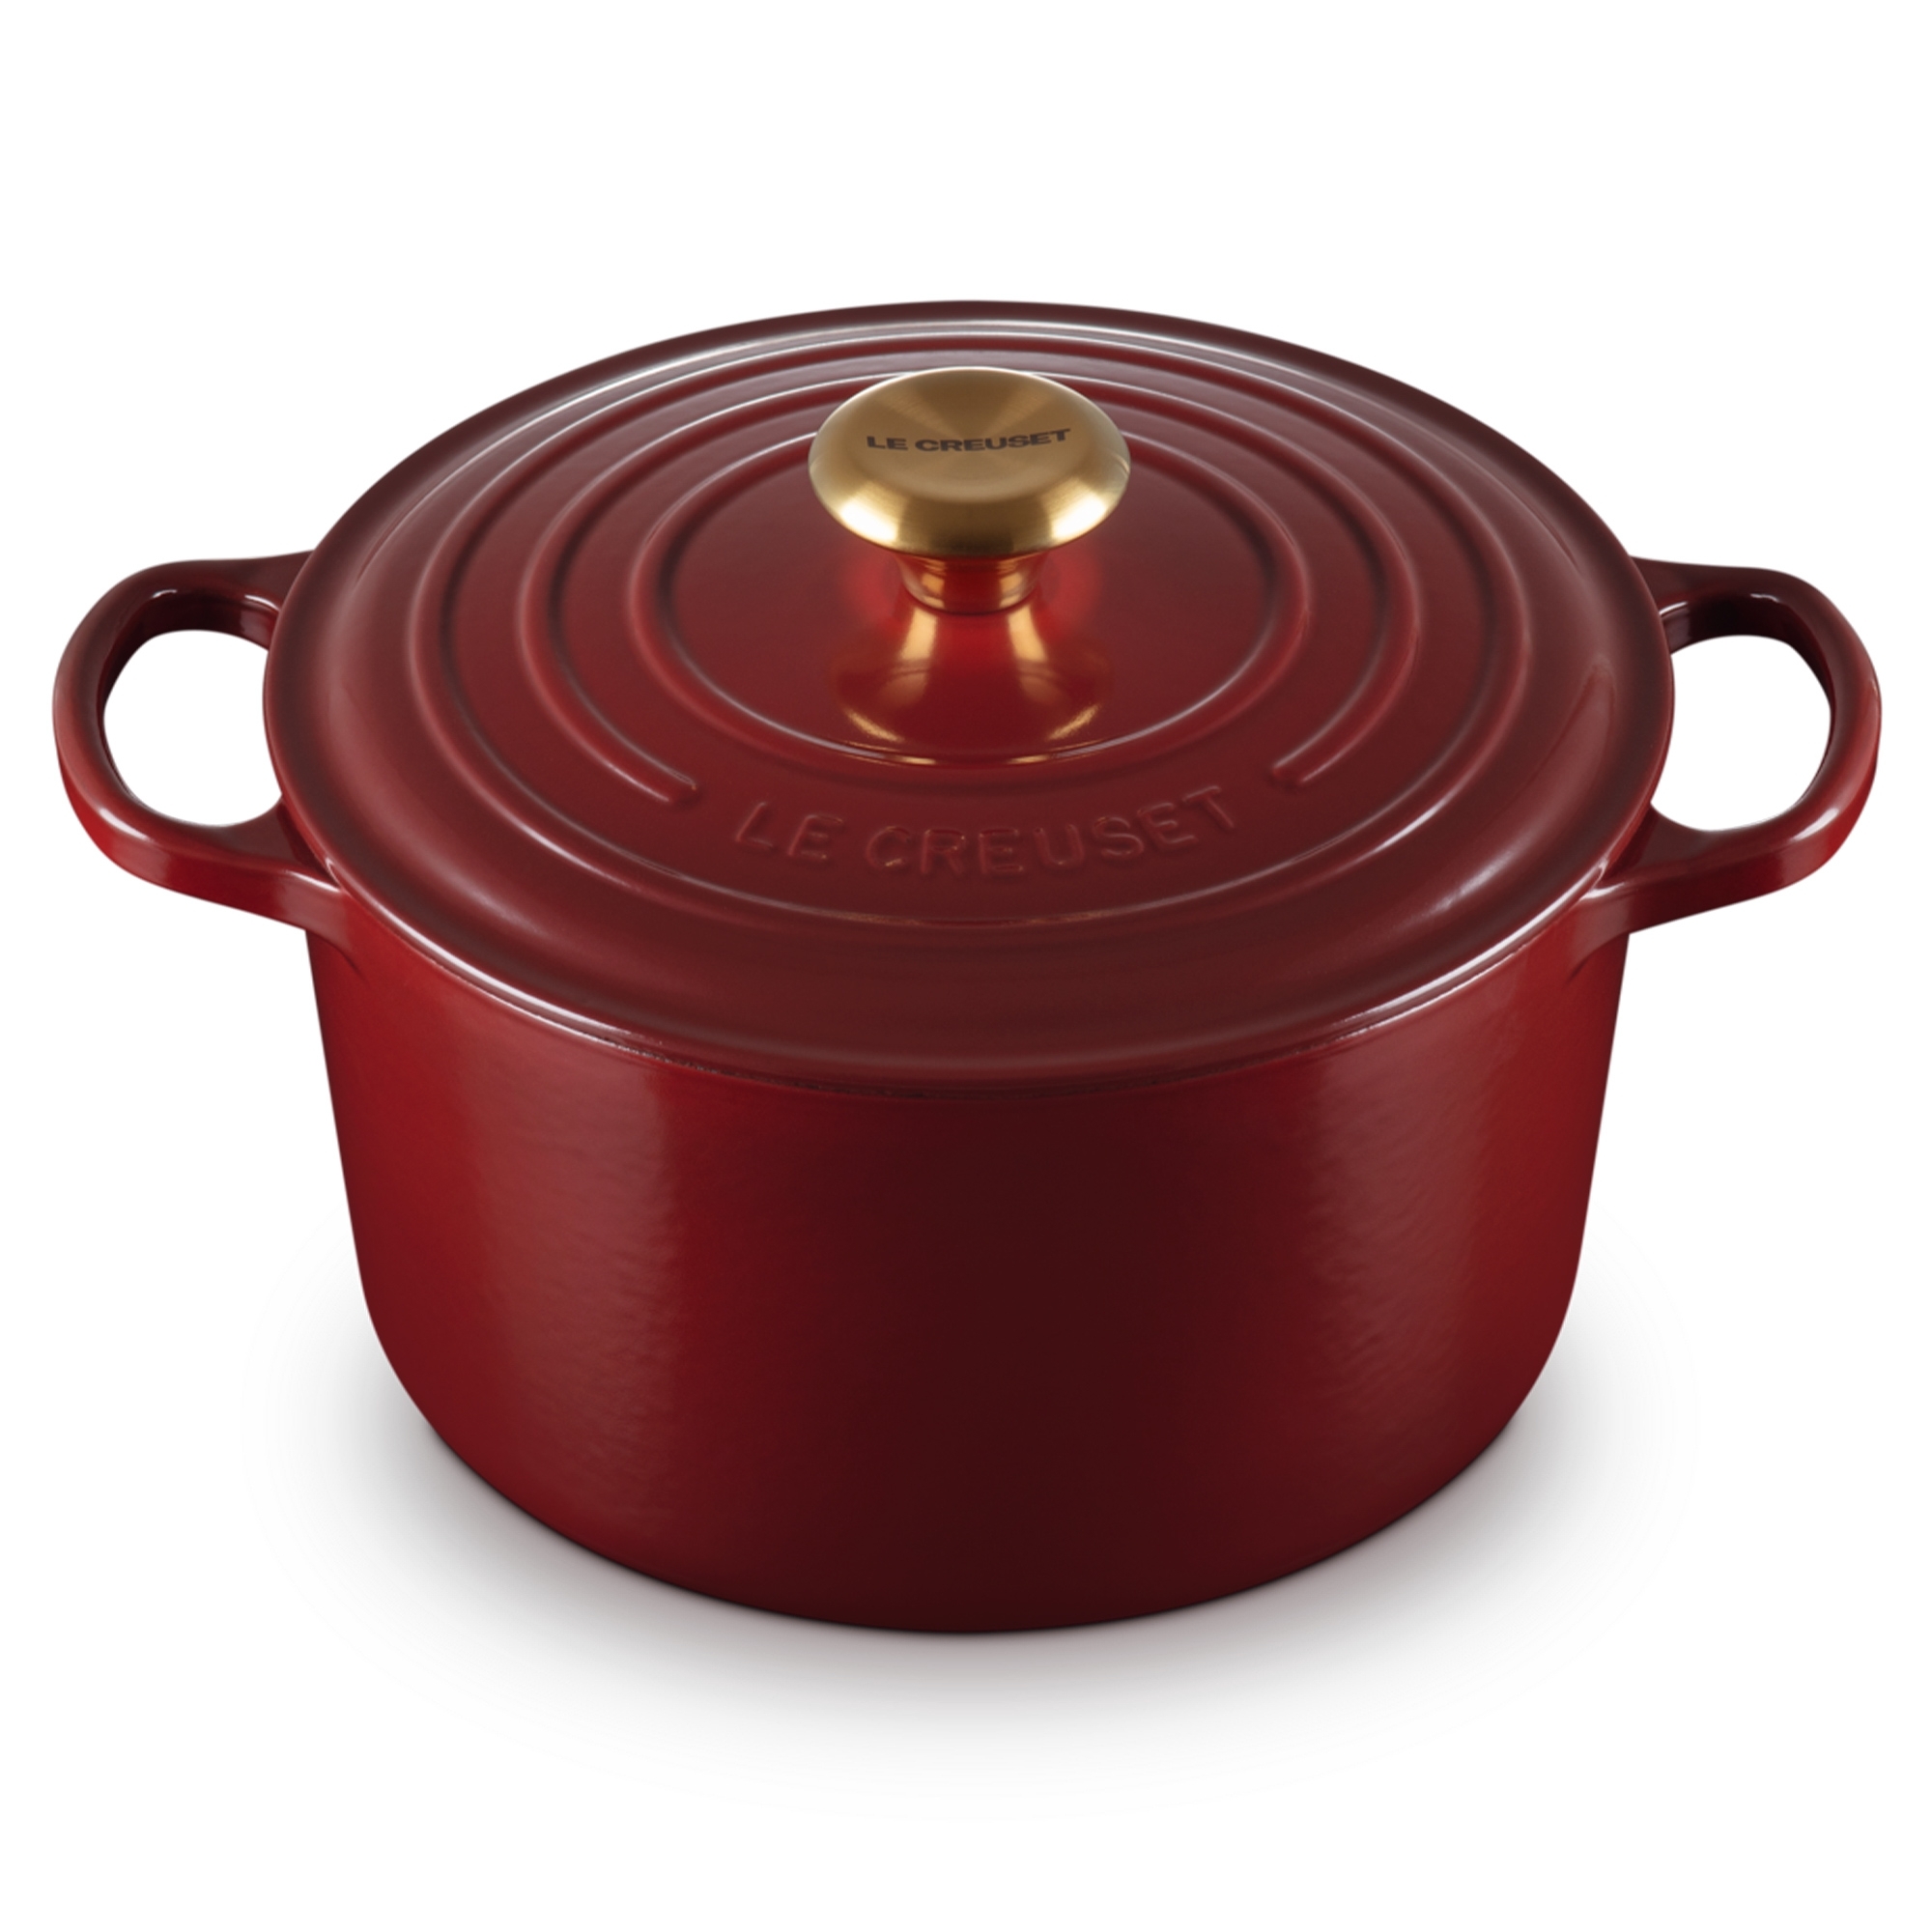 Le Creuset  - Signature French Oven 24 cm extra high - 5 L